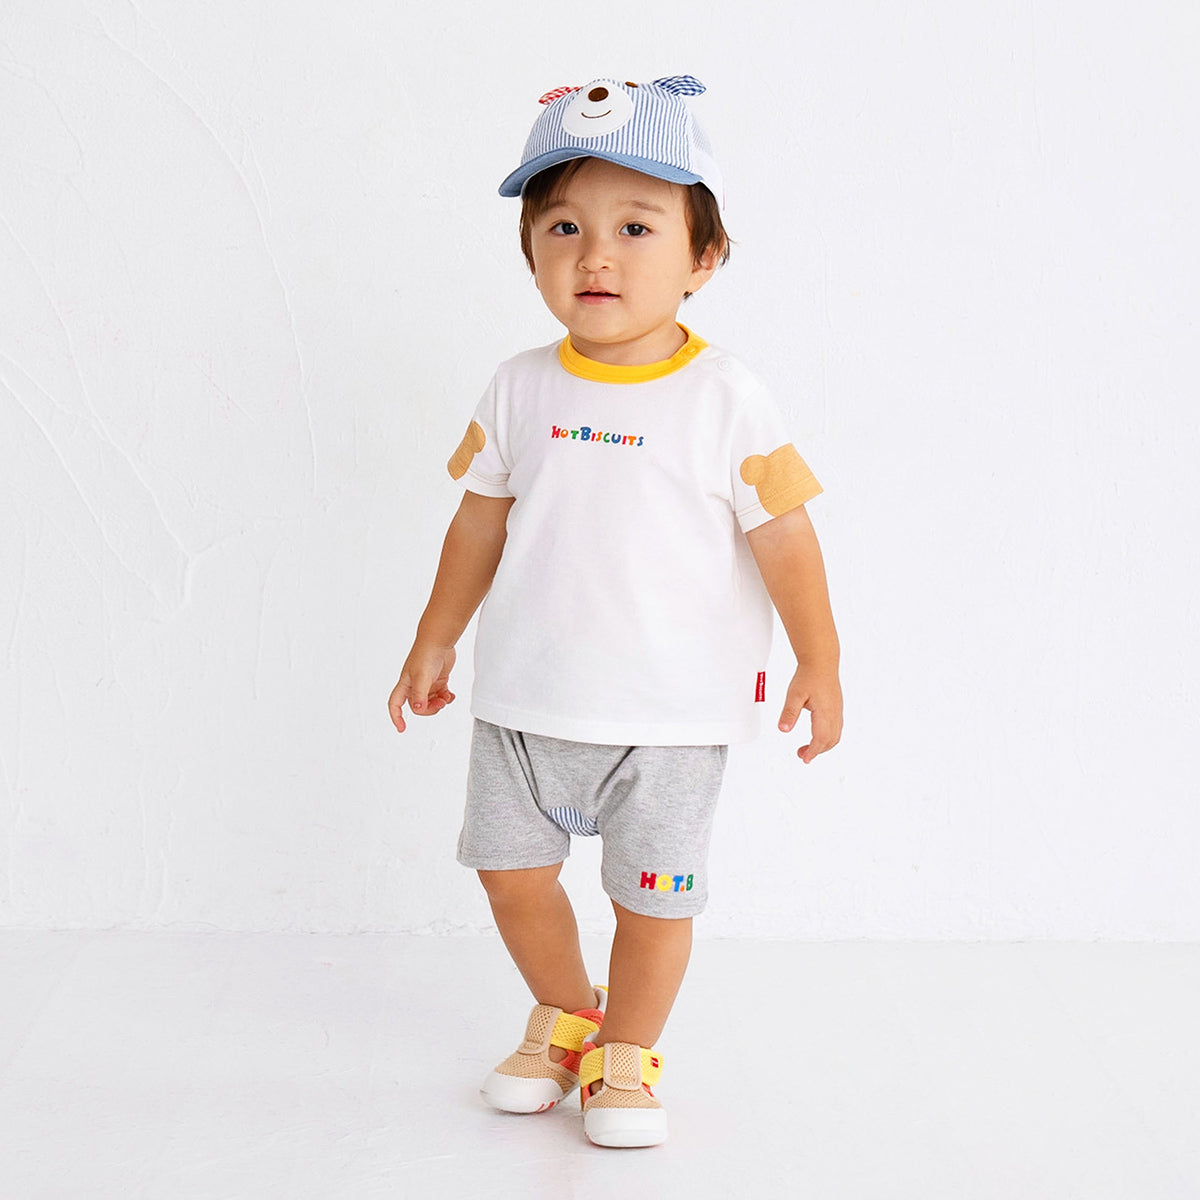 MIKI HOUSE USA Official | Shoes & Clothes for babies and kids